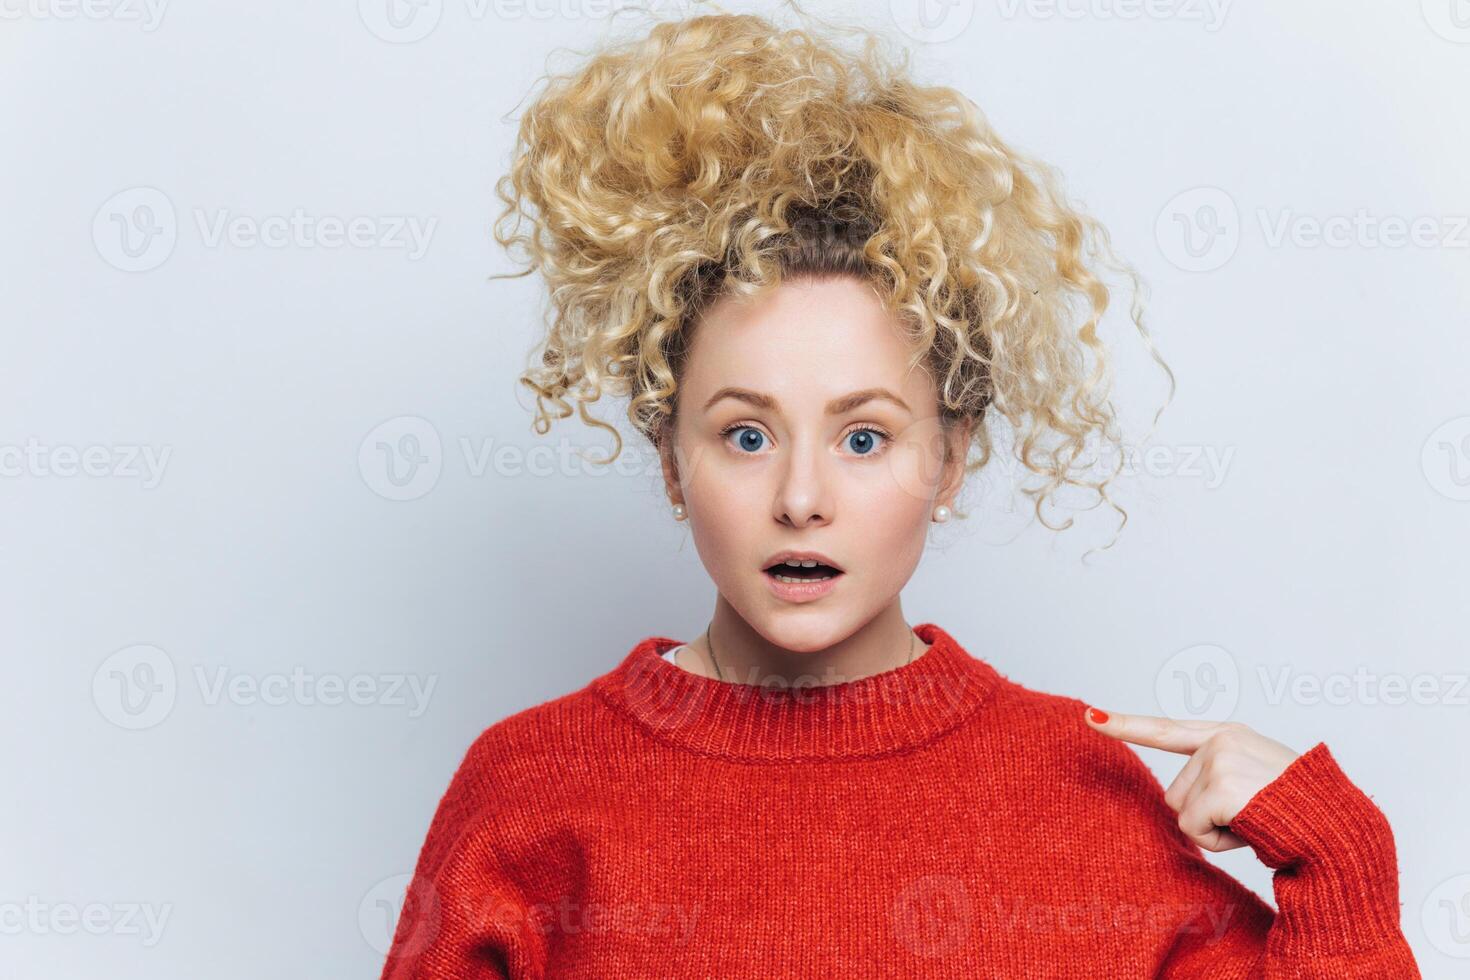 Surprised young woman with wild curly hair, pointing at herself in disbelief, wearing a vivid red sweater photo